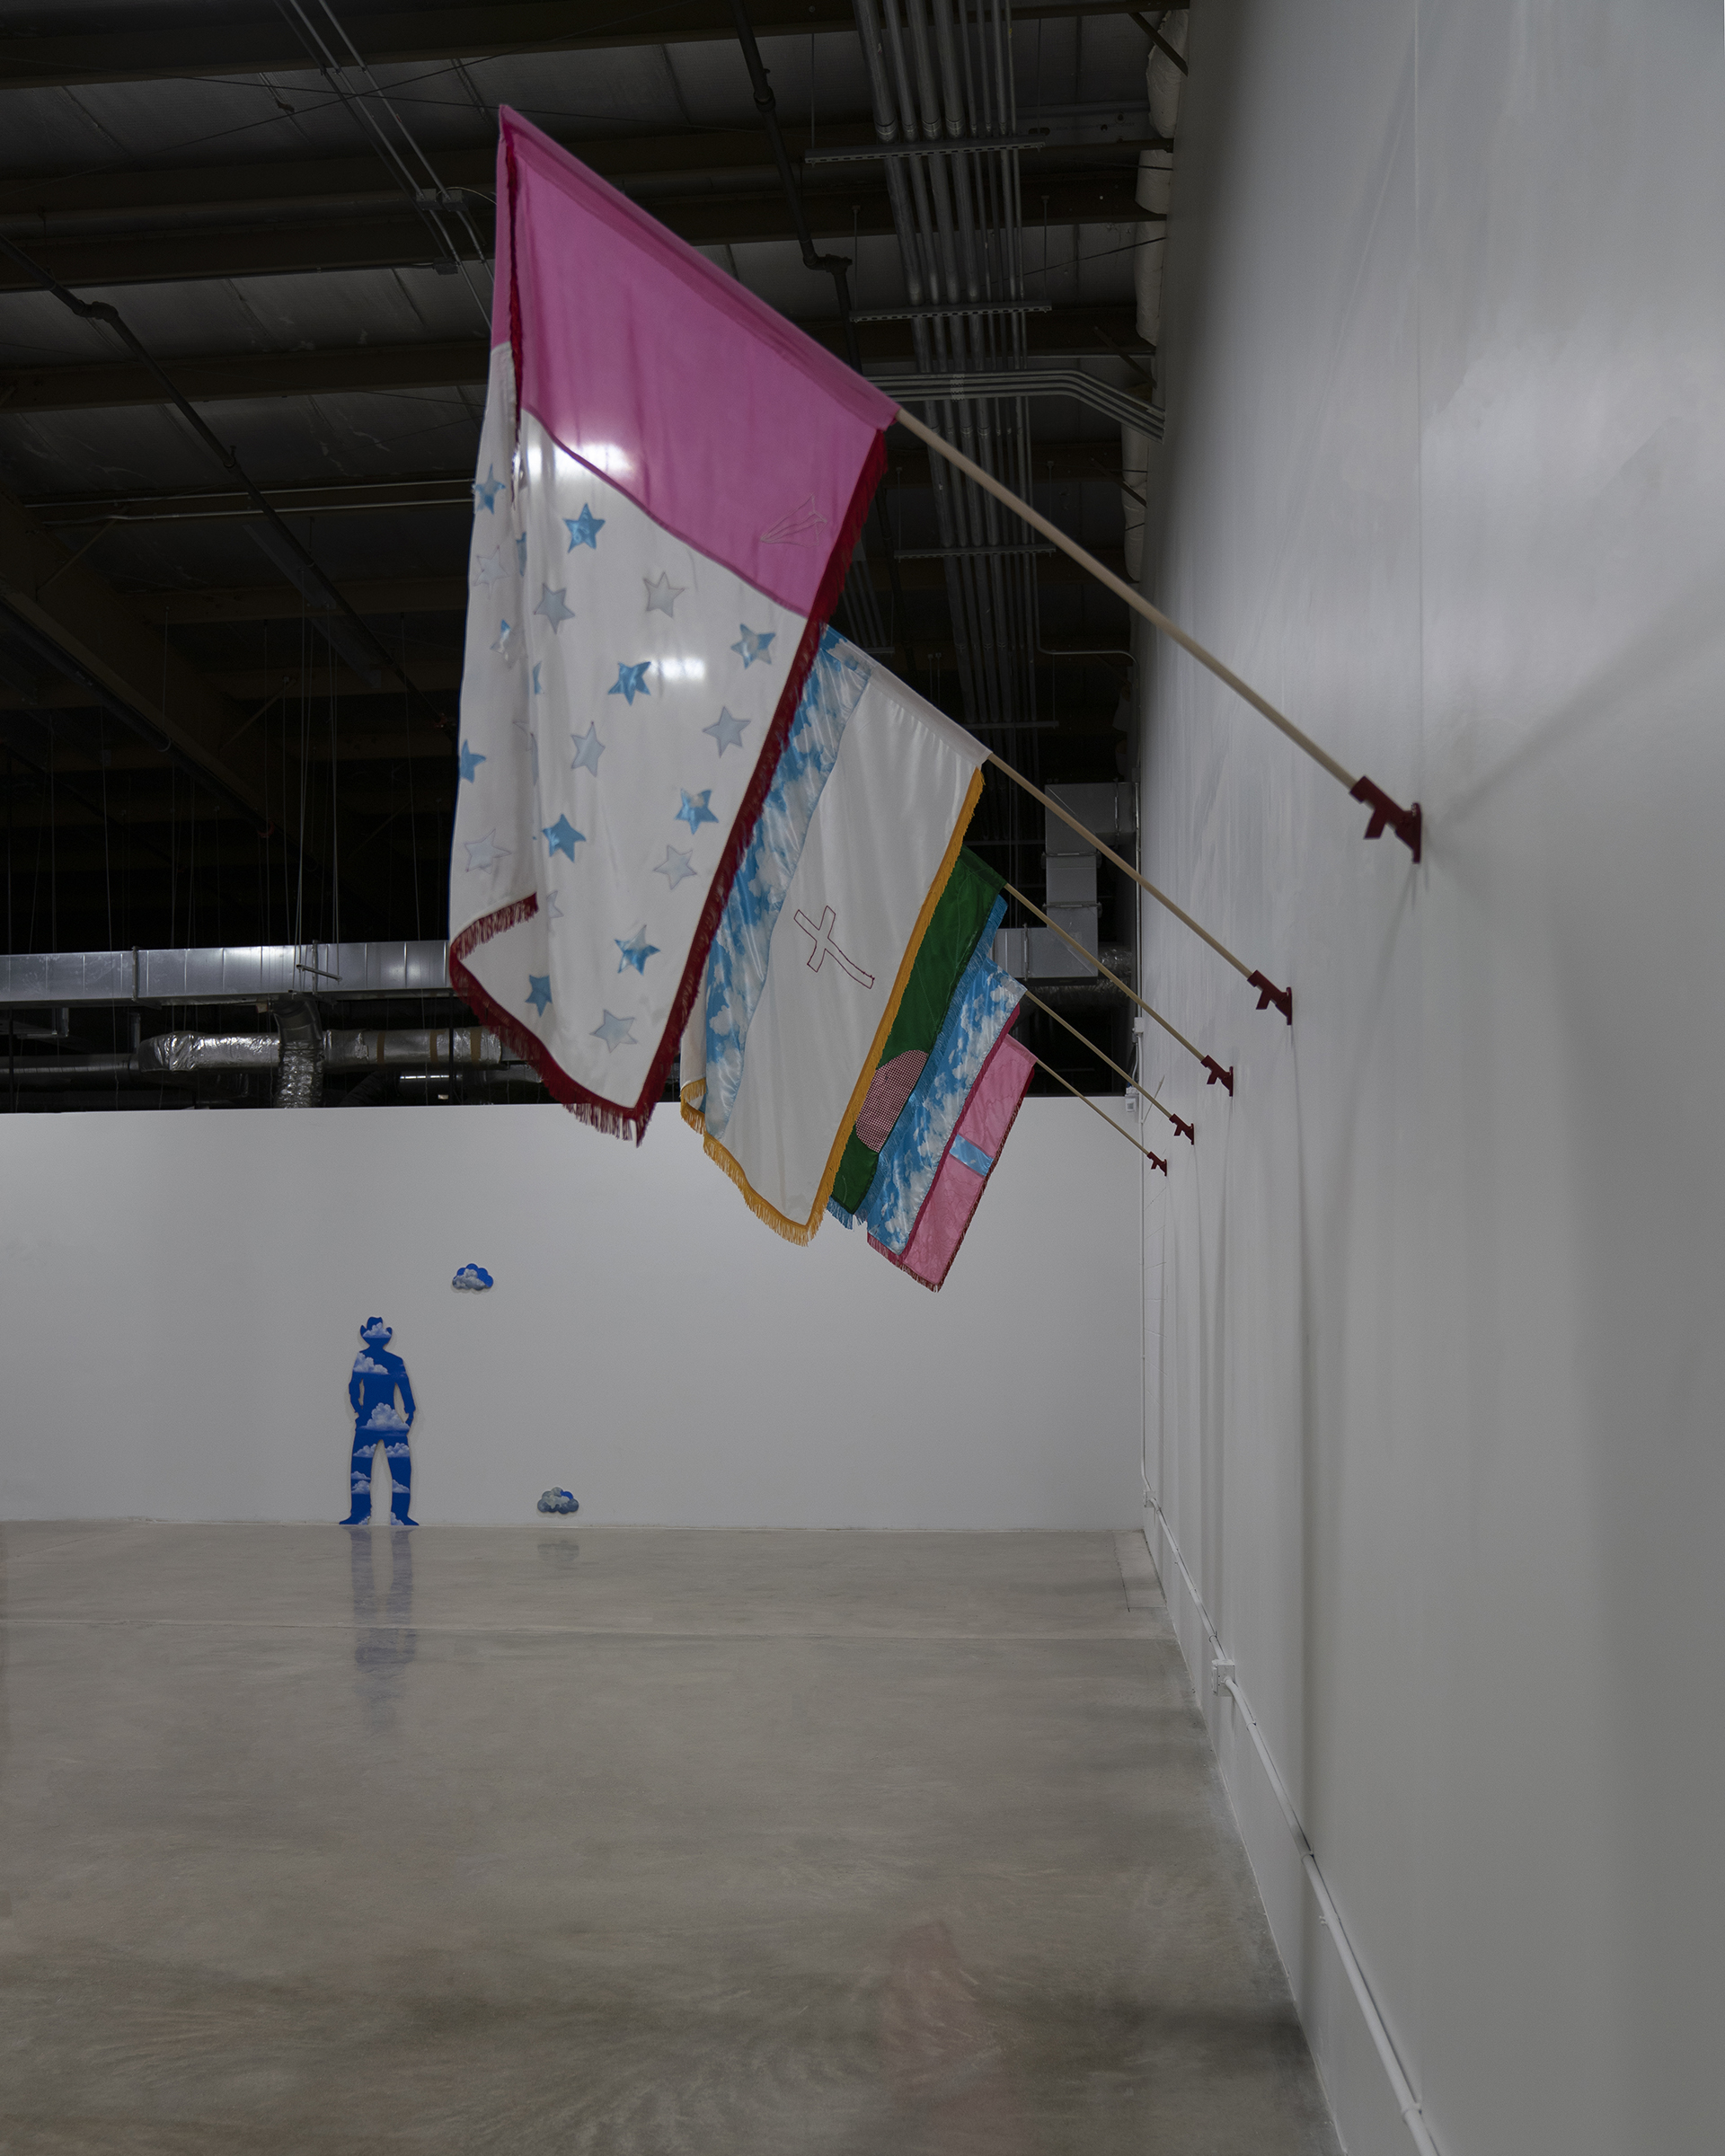 Installation view of For No Man's Land by Eva Gabriella Flynn at the Art Lofts Gallery, University of Wisconsin-Madison.